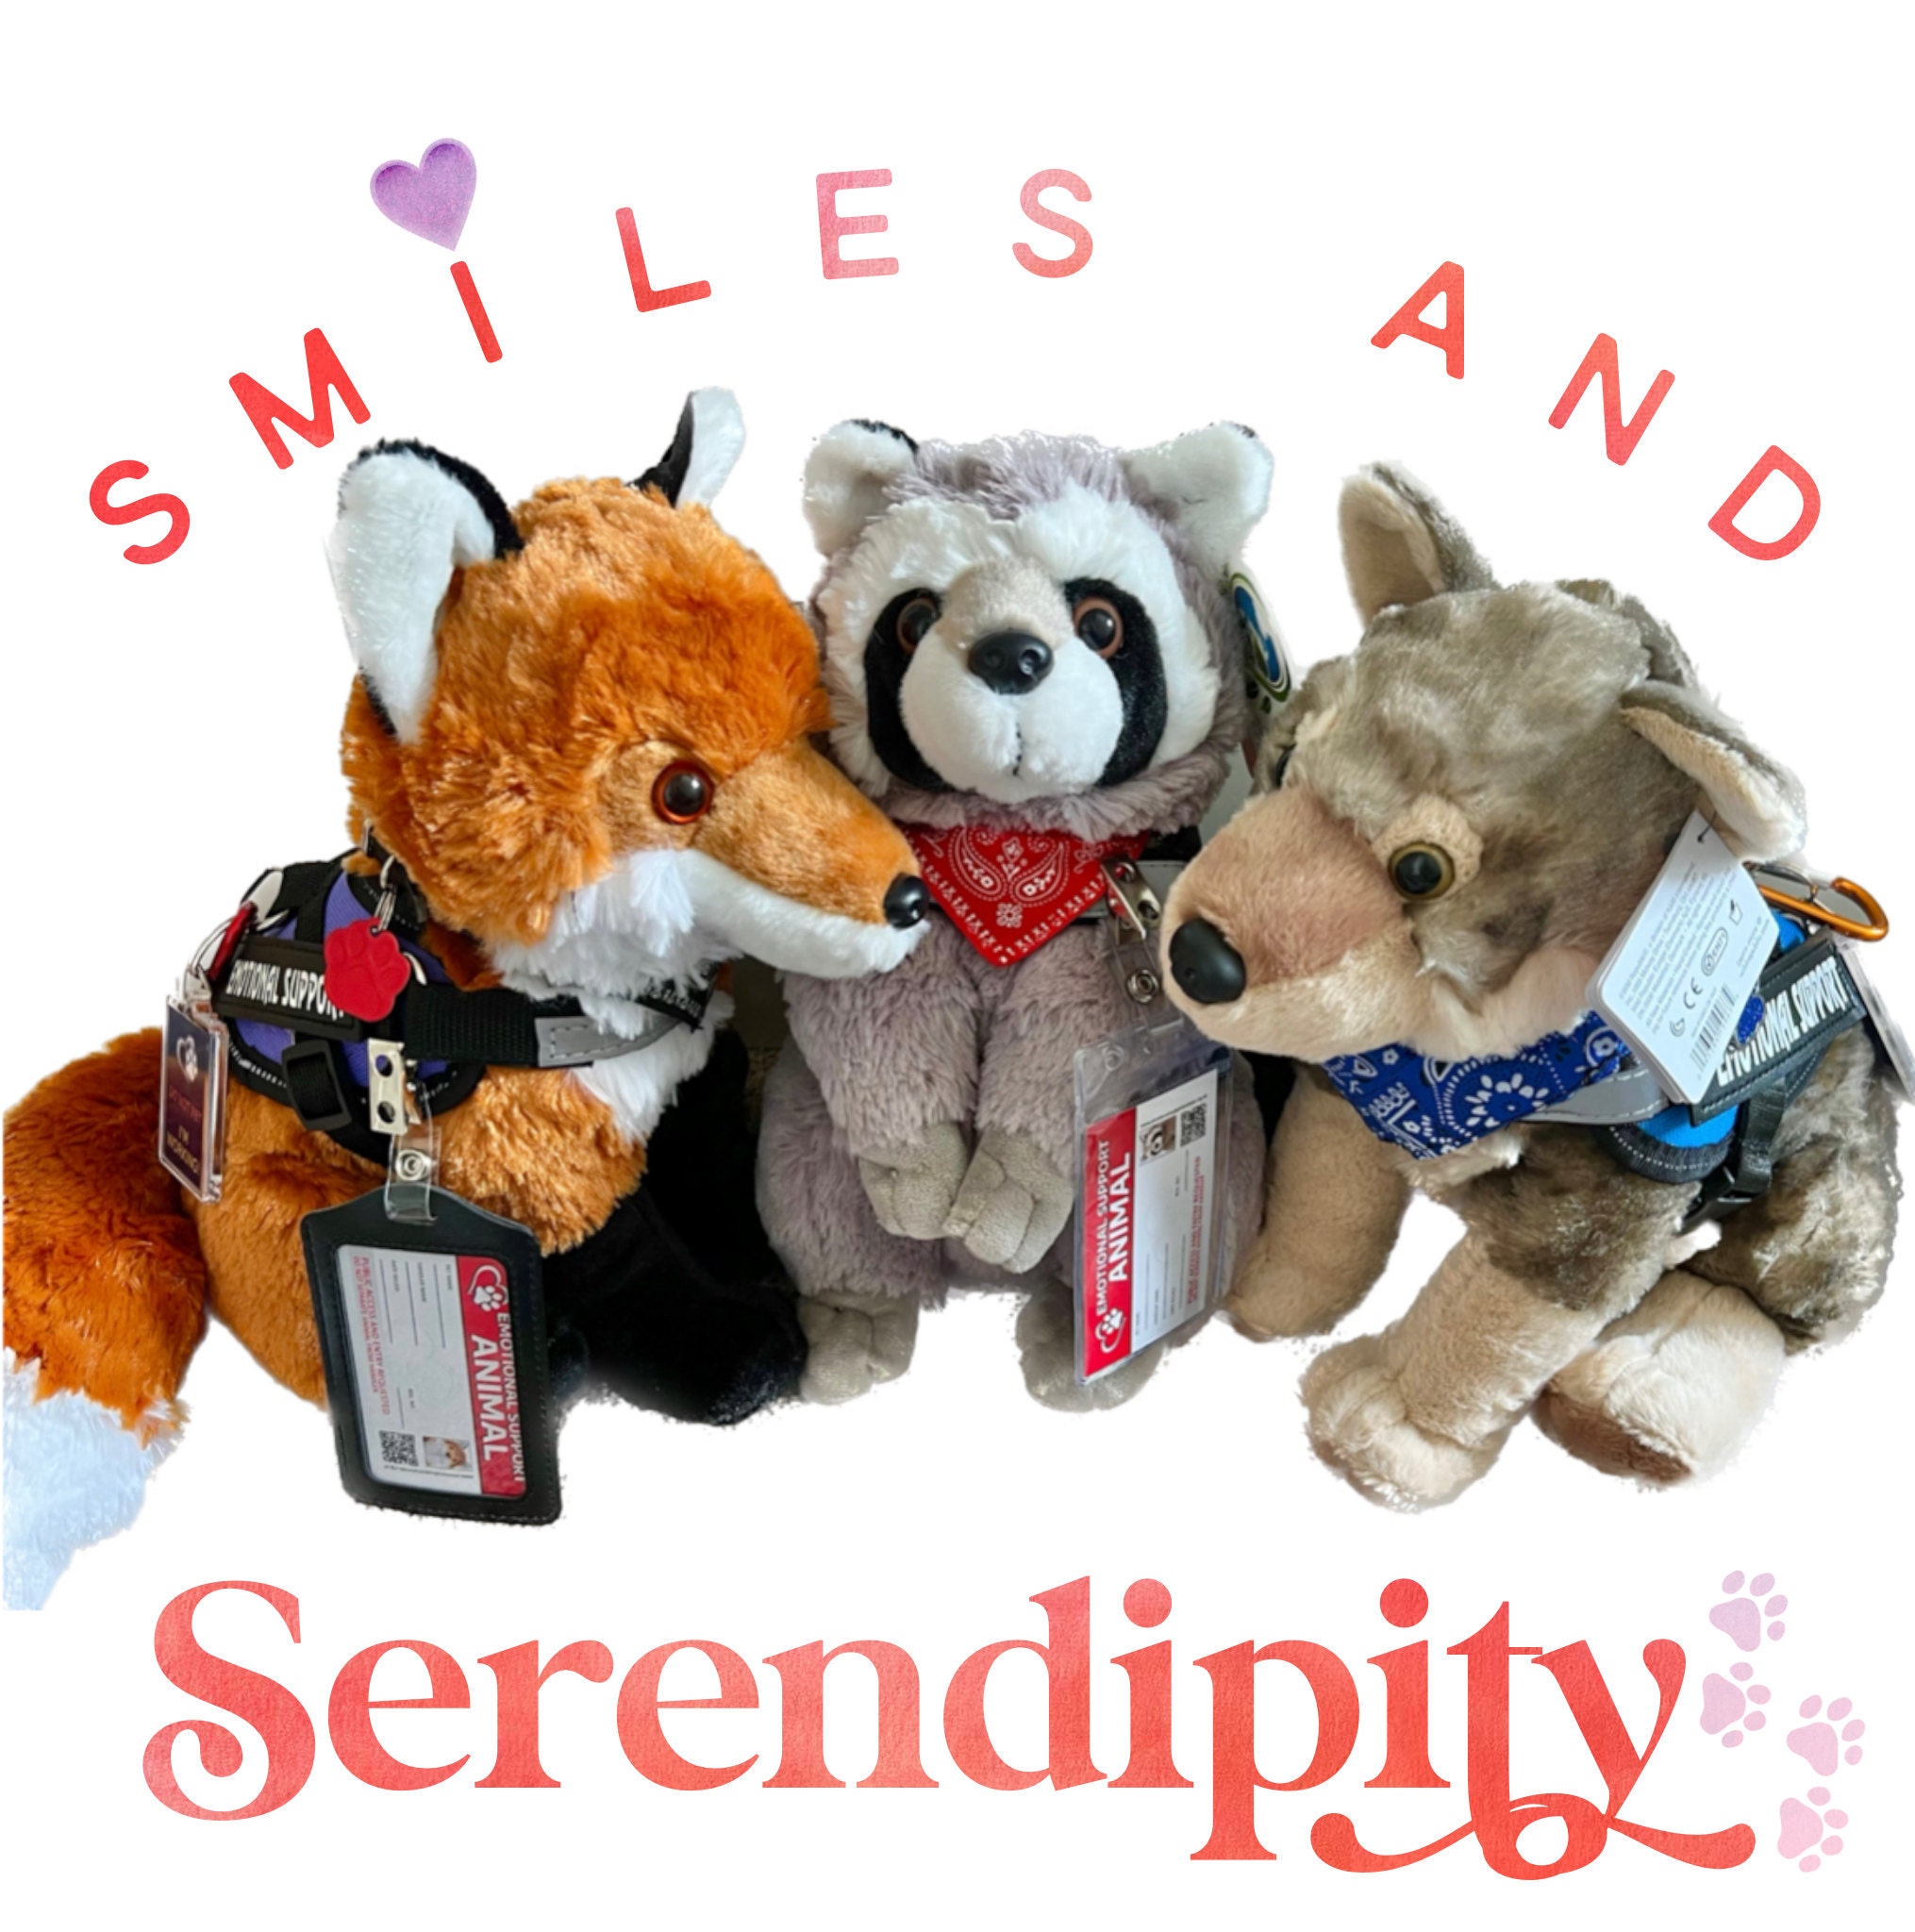 what is an emotional support stuffed animal dog for｜TikTok Search